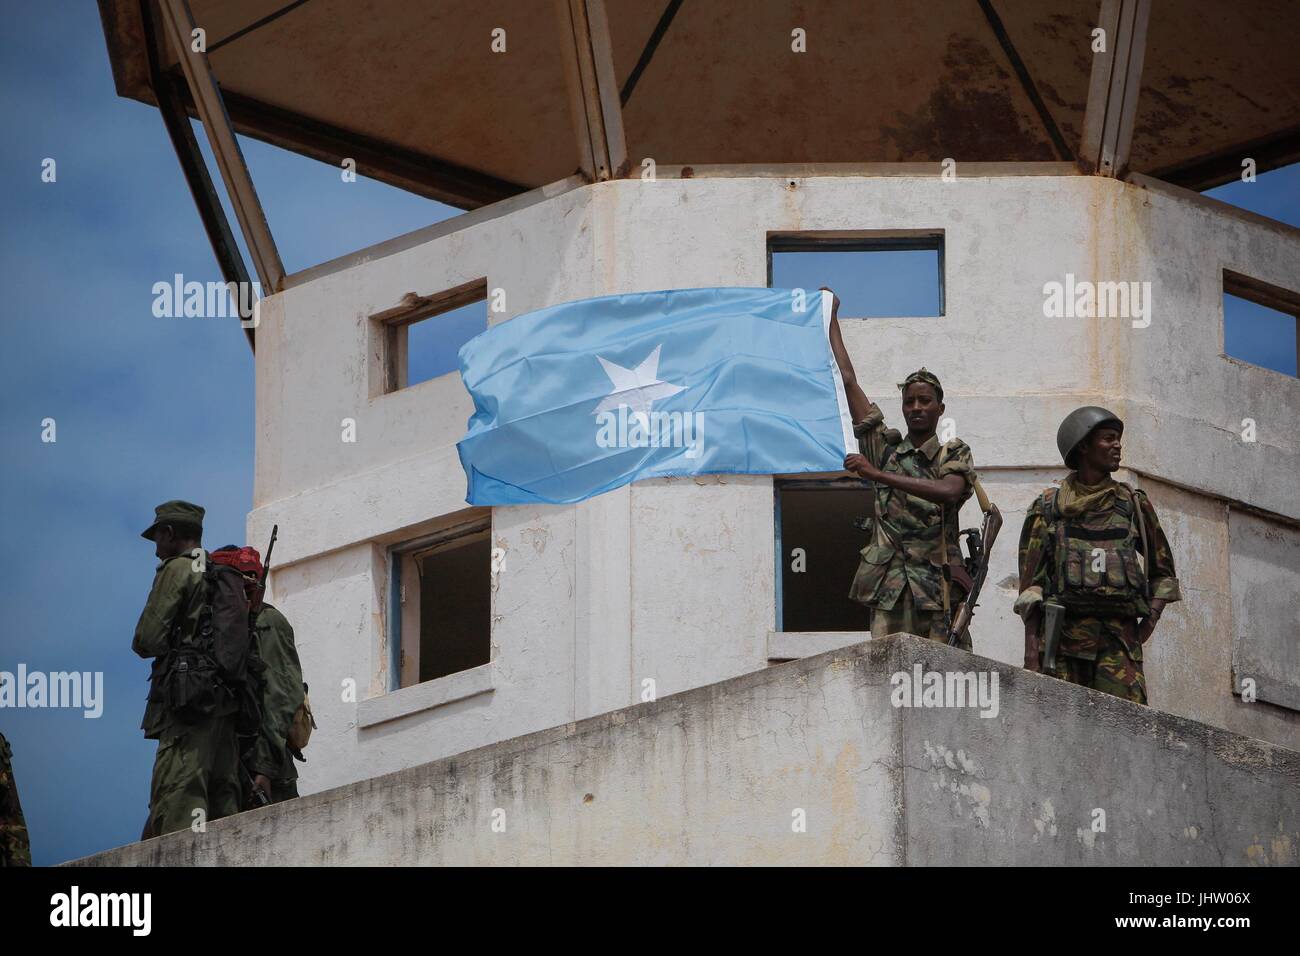 Somalian soldiers and members of the Ras Kimboni militia fly the Somali national flag from the former control tower of the Kismayo Airport while they celebrate its capture from the Al-Qaeda-affiliated extremist group Al Shabaab October 2, 2012 in Kismayo, Somalia.    (photo by Stuart Price  via Planetpix) Stock Photo